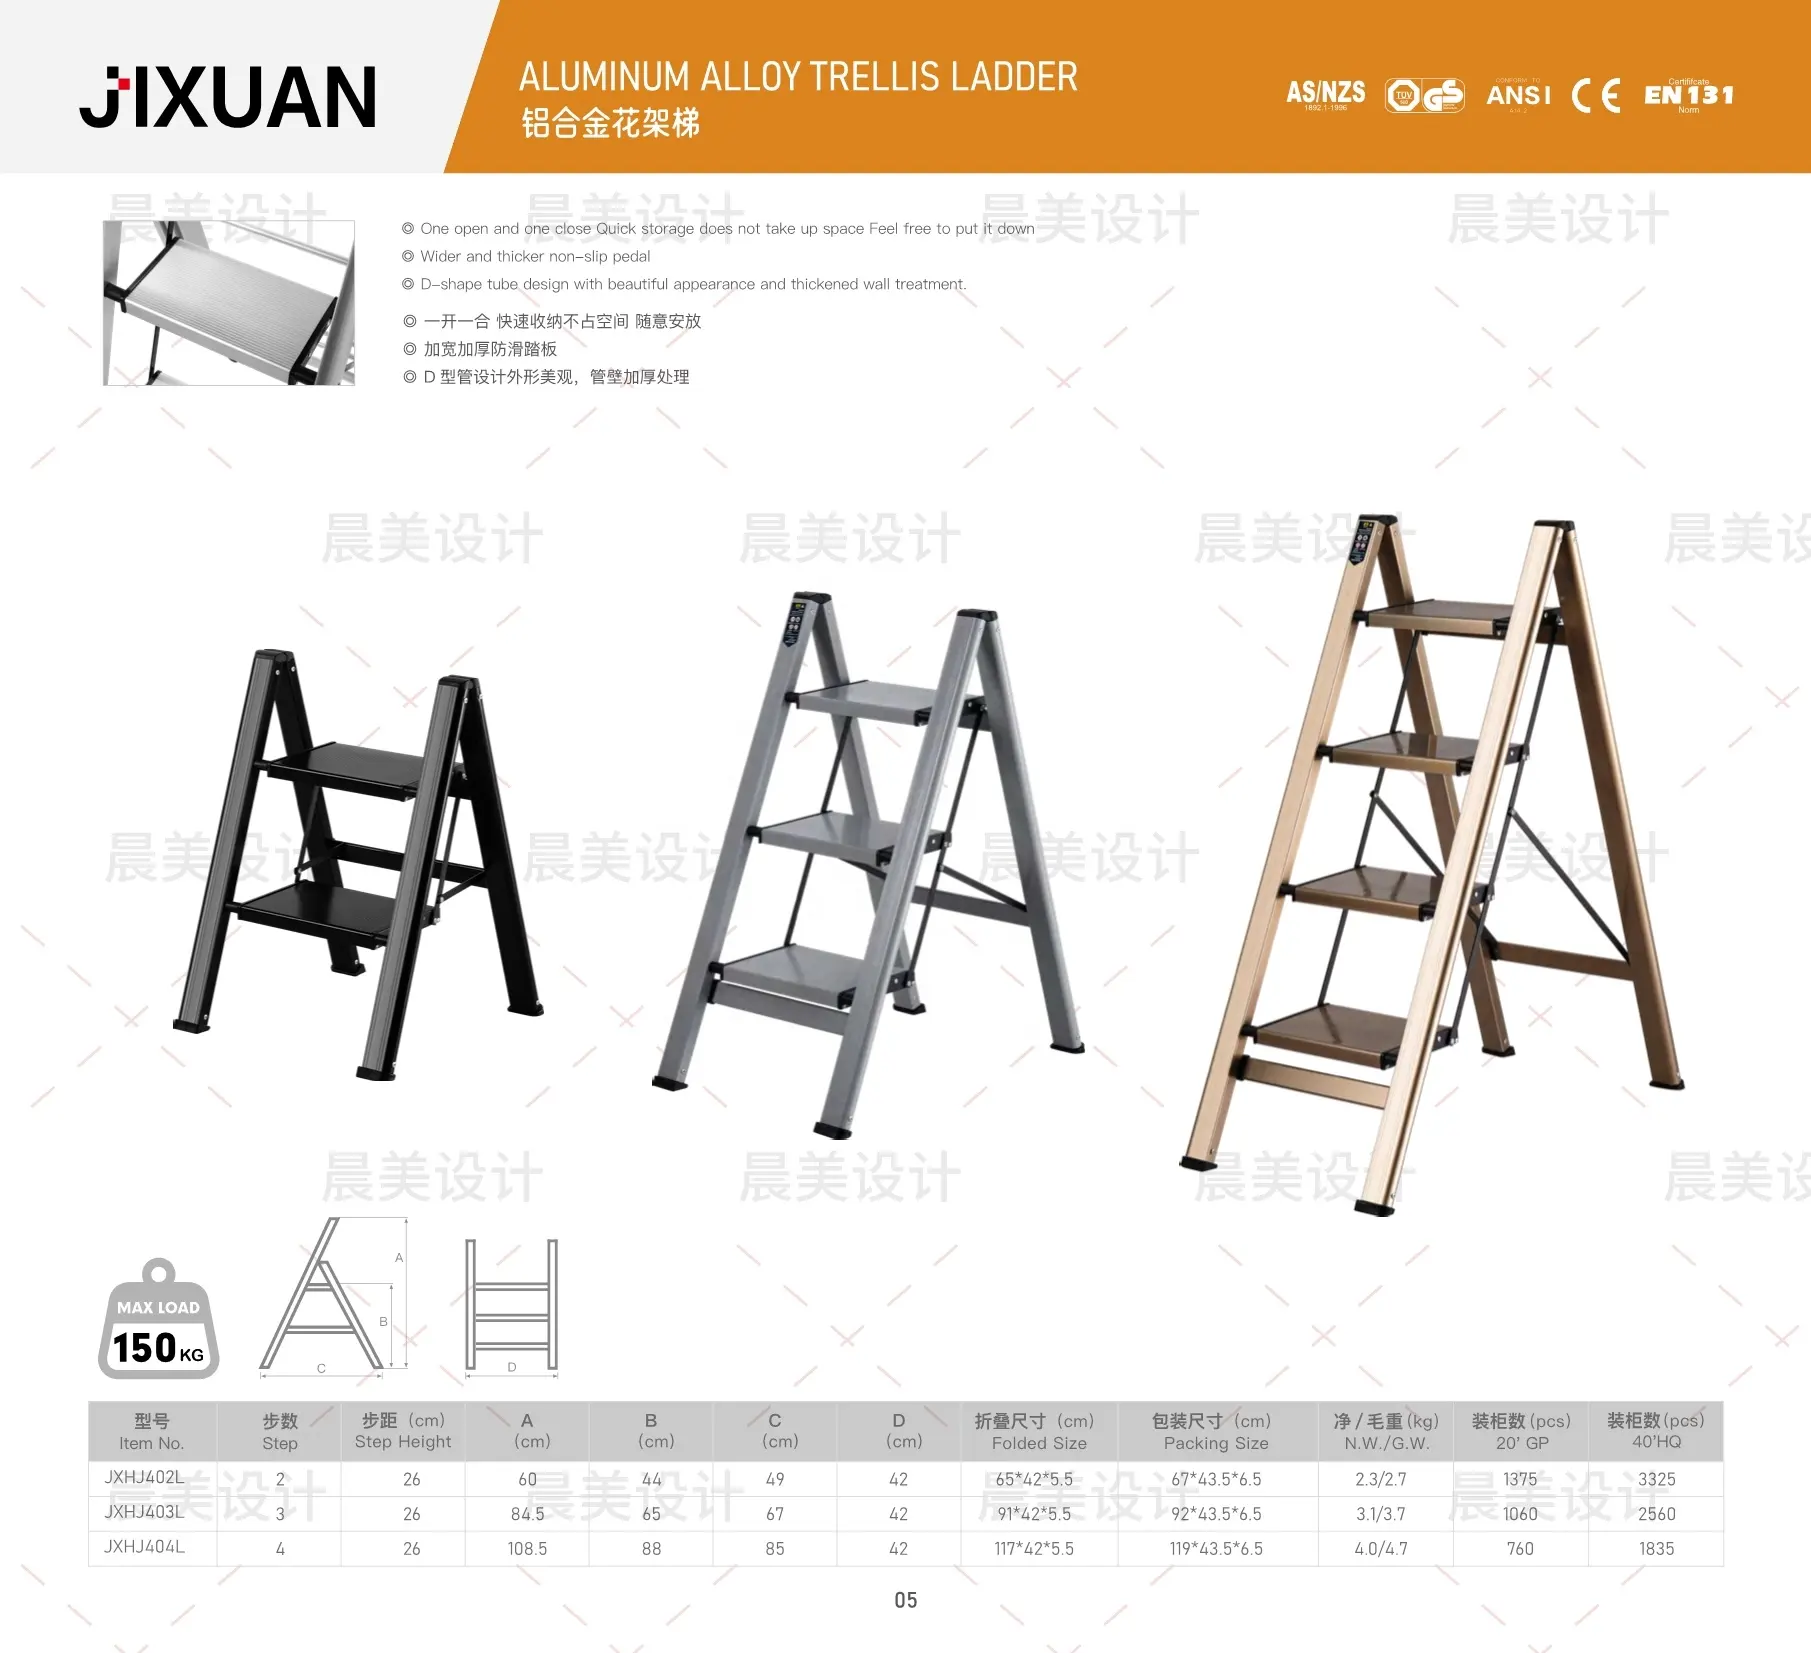 Hot Aluminum Wider and thicker non-slip pedal 2 Step Small Ladder 2 step folding ladder